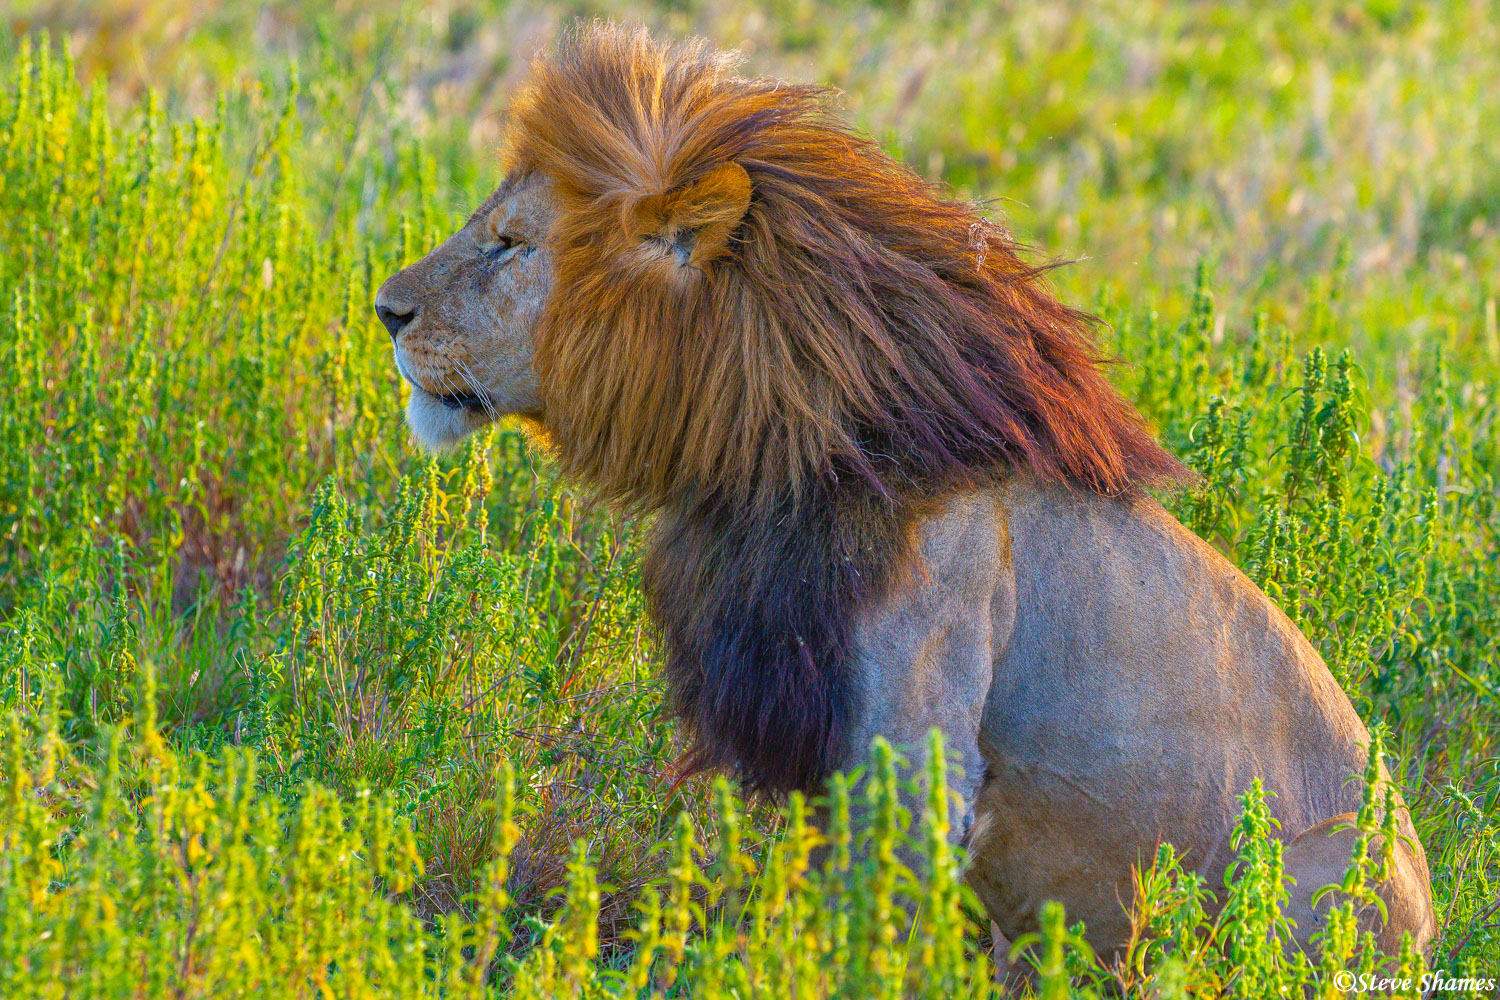 I like this scene with the lion in the bright grass in the morning sun.